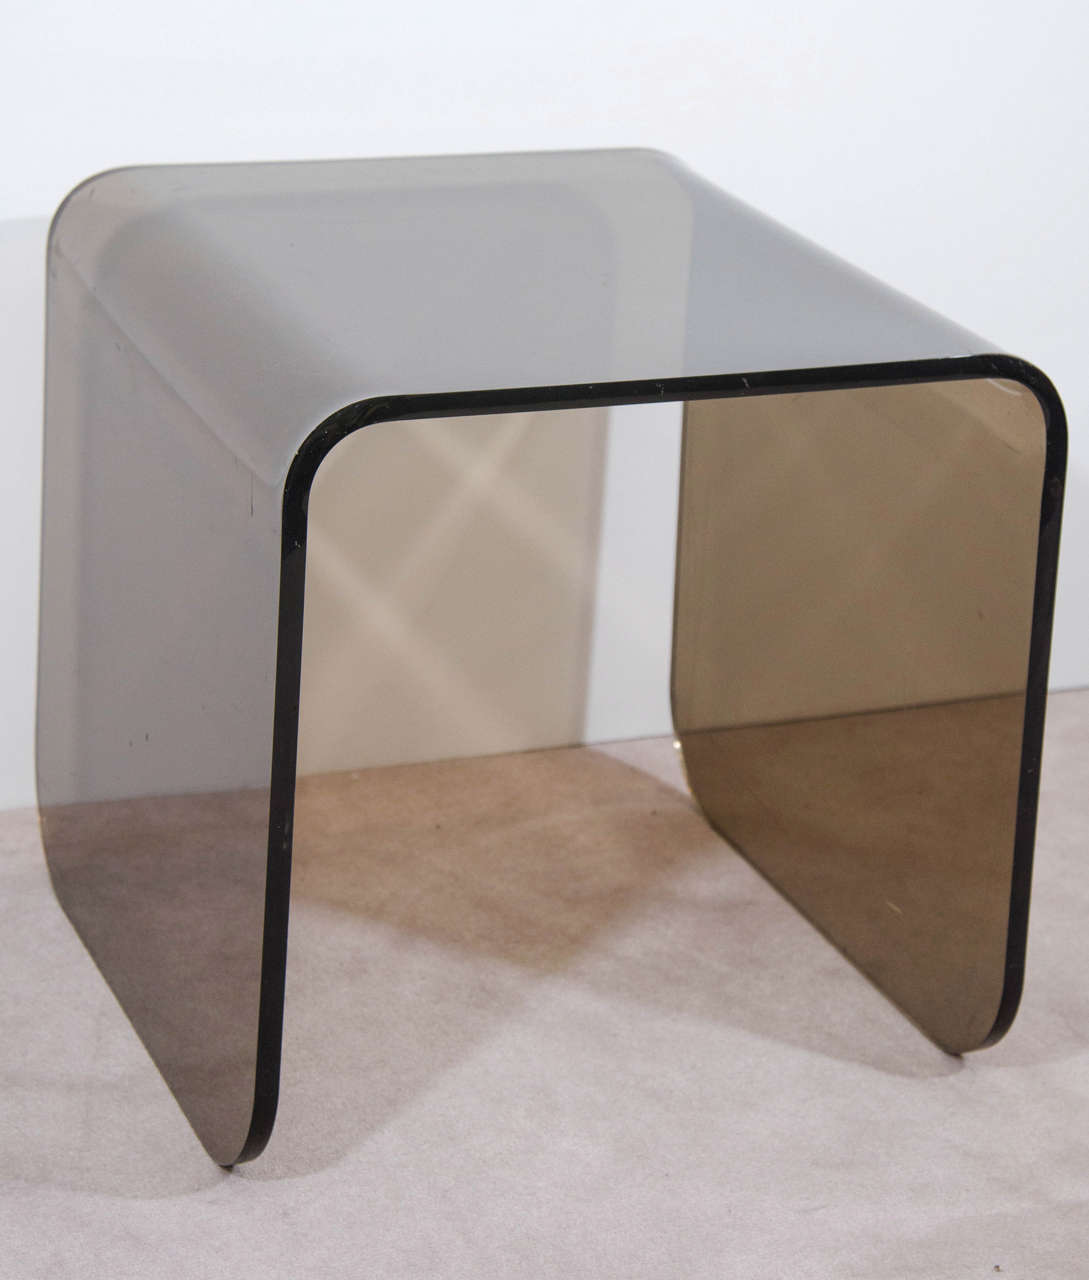 Spectacular Trio of Modern Waterfall Design Quartz Lucite Nesting Tables In Excellent Condition For Sale In Mount Penn, PA